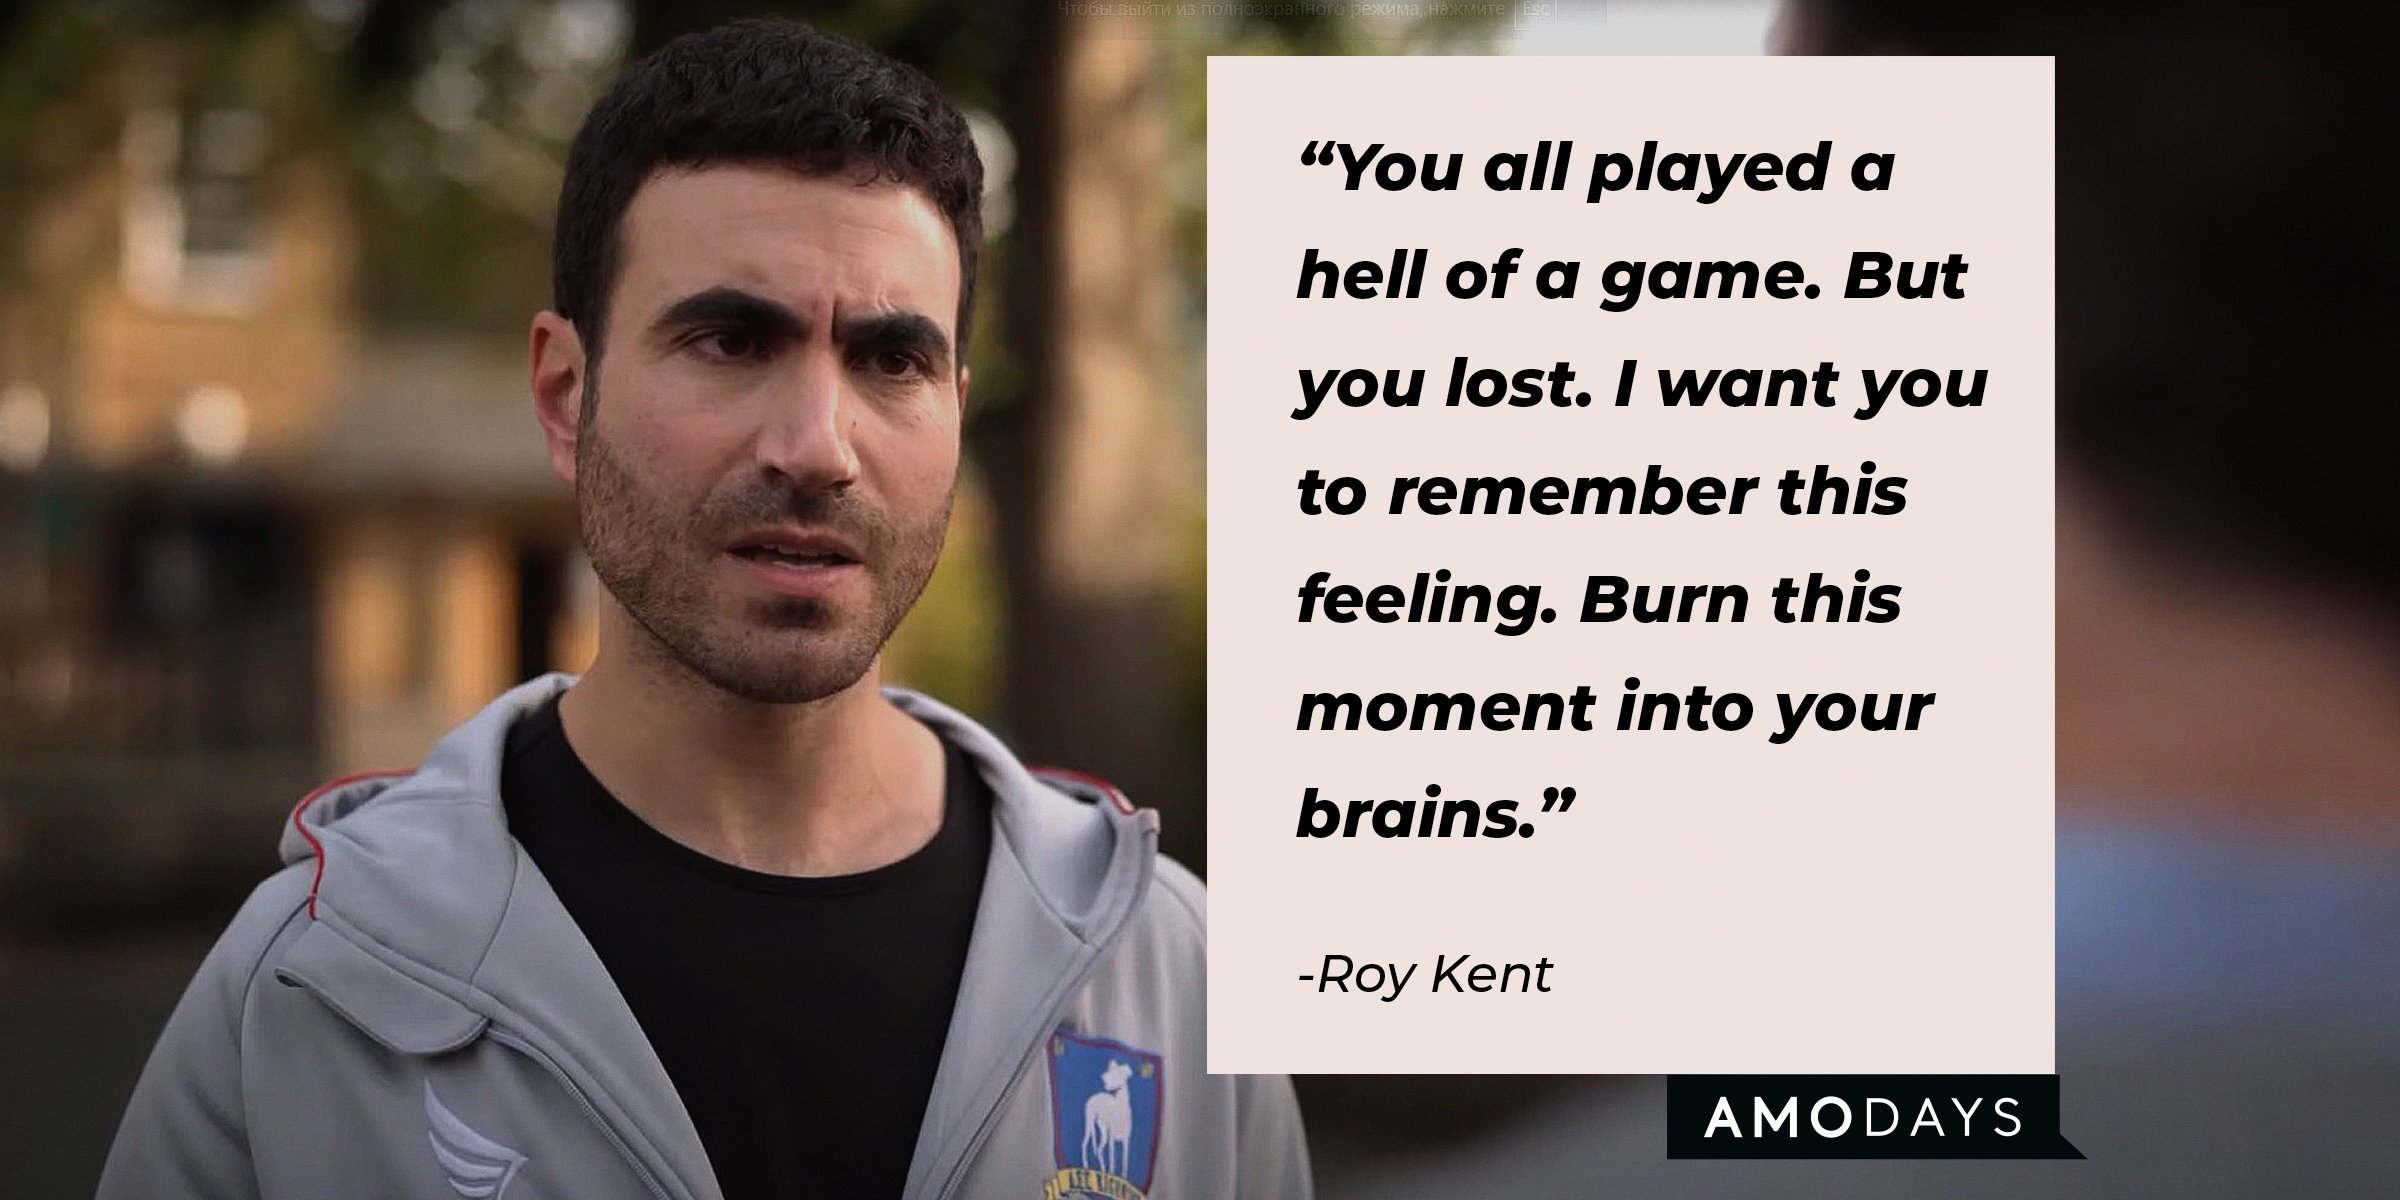 Source: youtube.com/AppleTV | A picture of Roy Kent, with a quote by him that reads, "You all played a hell of a game. But you lost. I want you to remember this feeling. Burn this moment into your brains.”